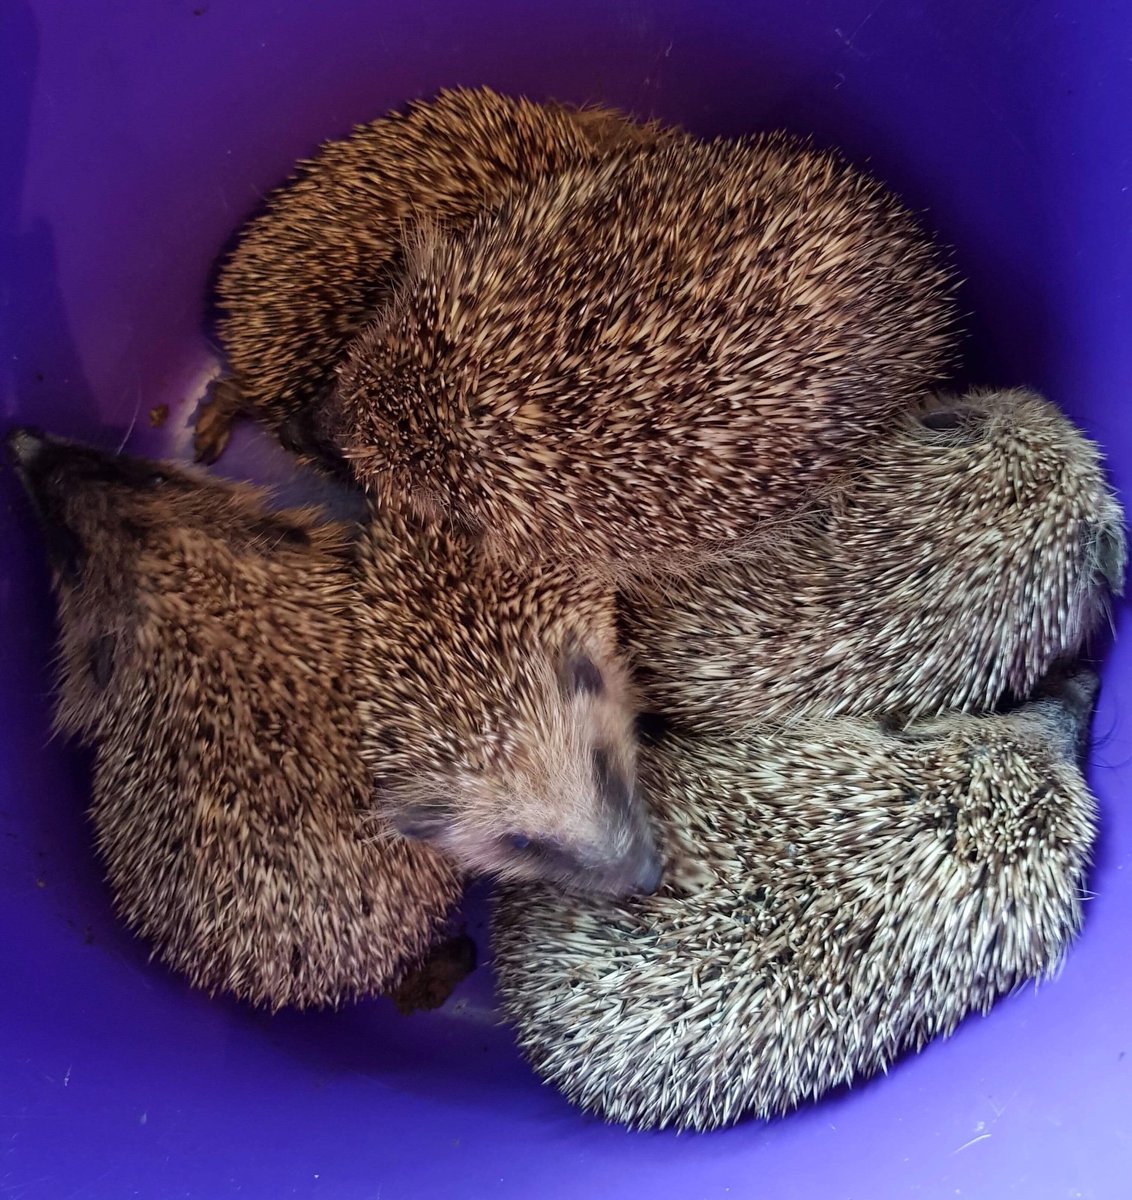 If you can’t sleep...try counting the @KWRSSheppey hedgehogs! Night night all #sleep #insomnia